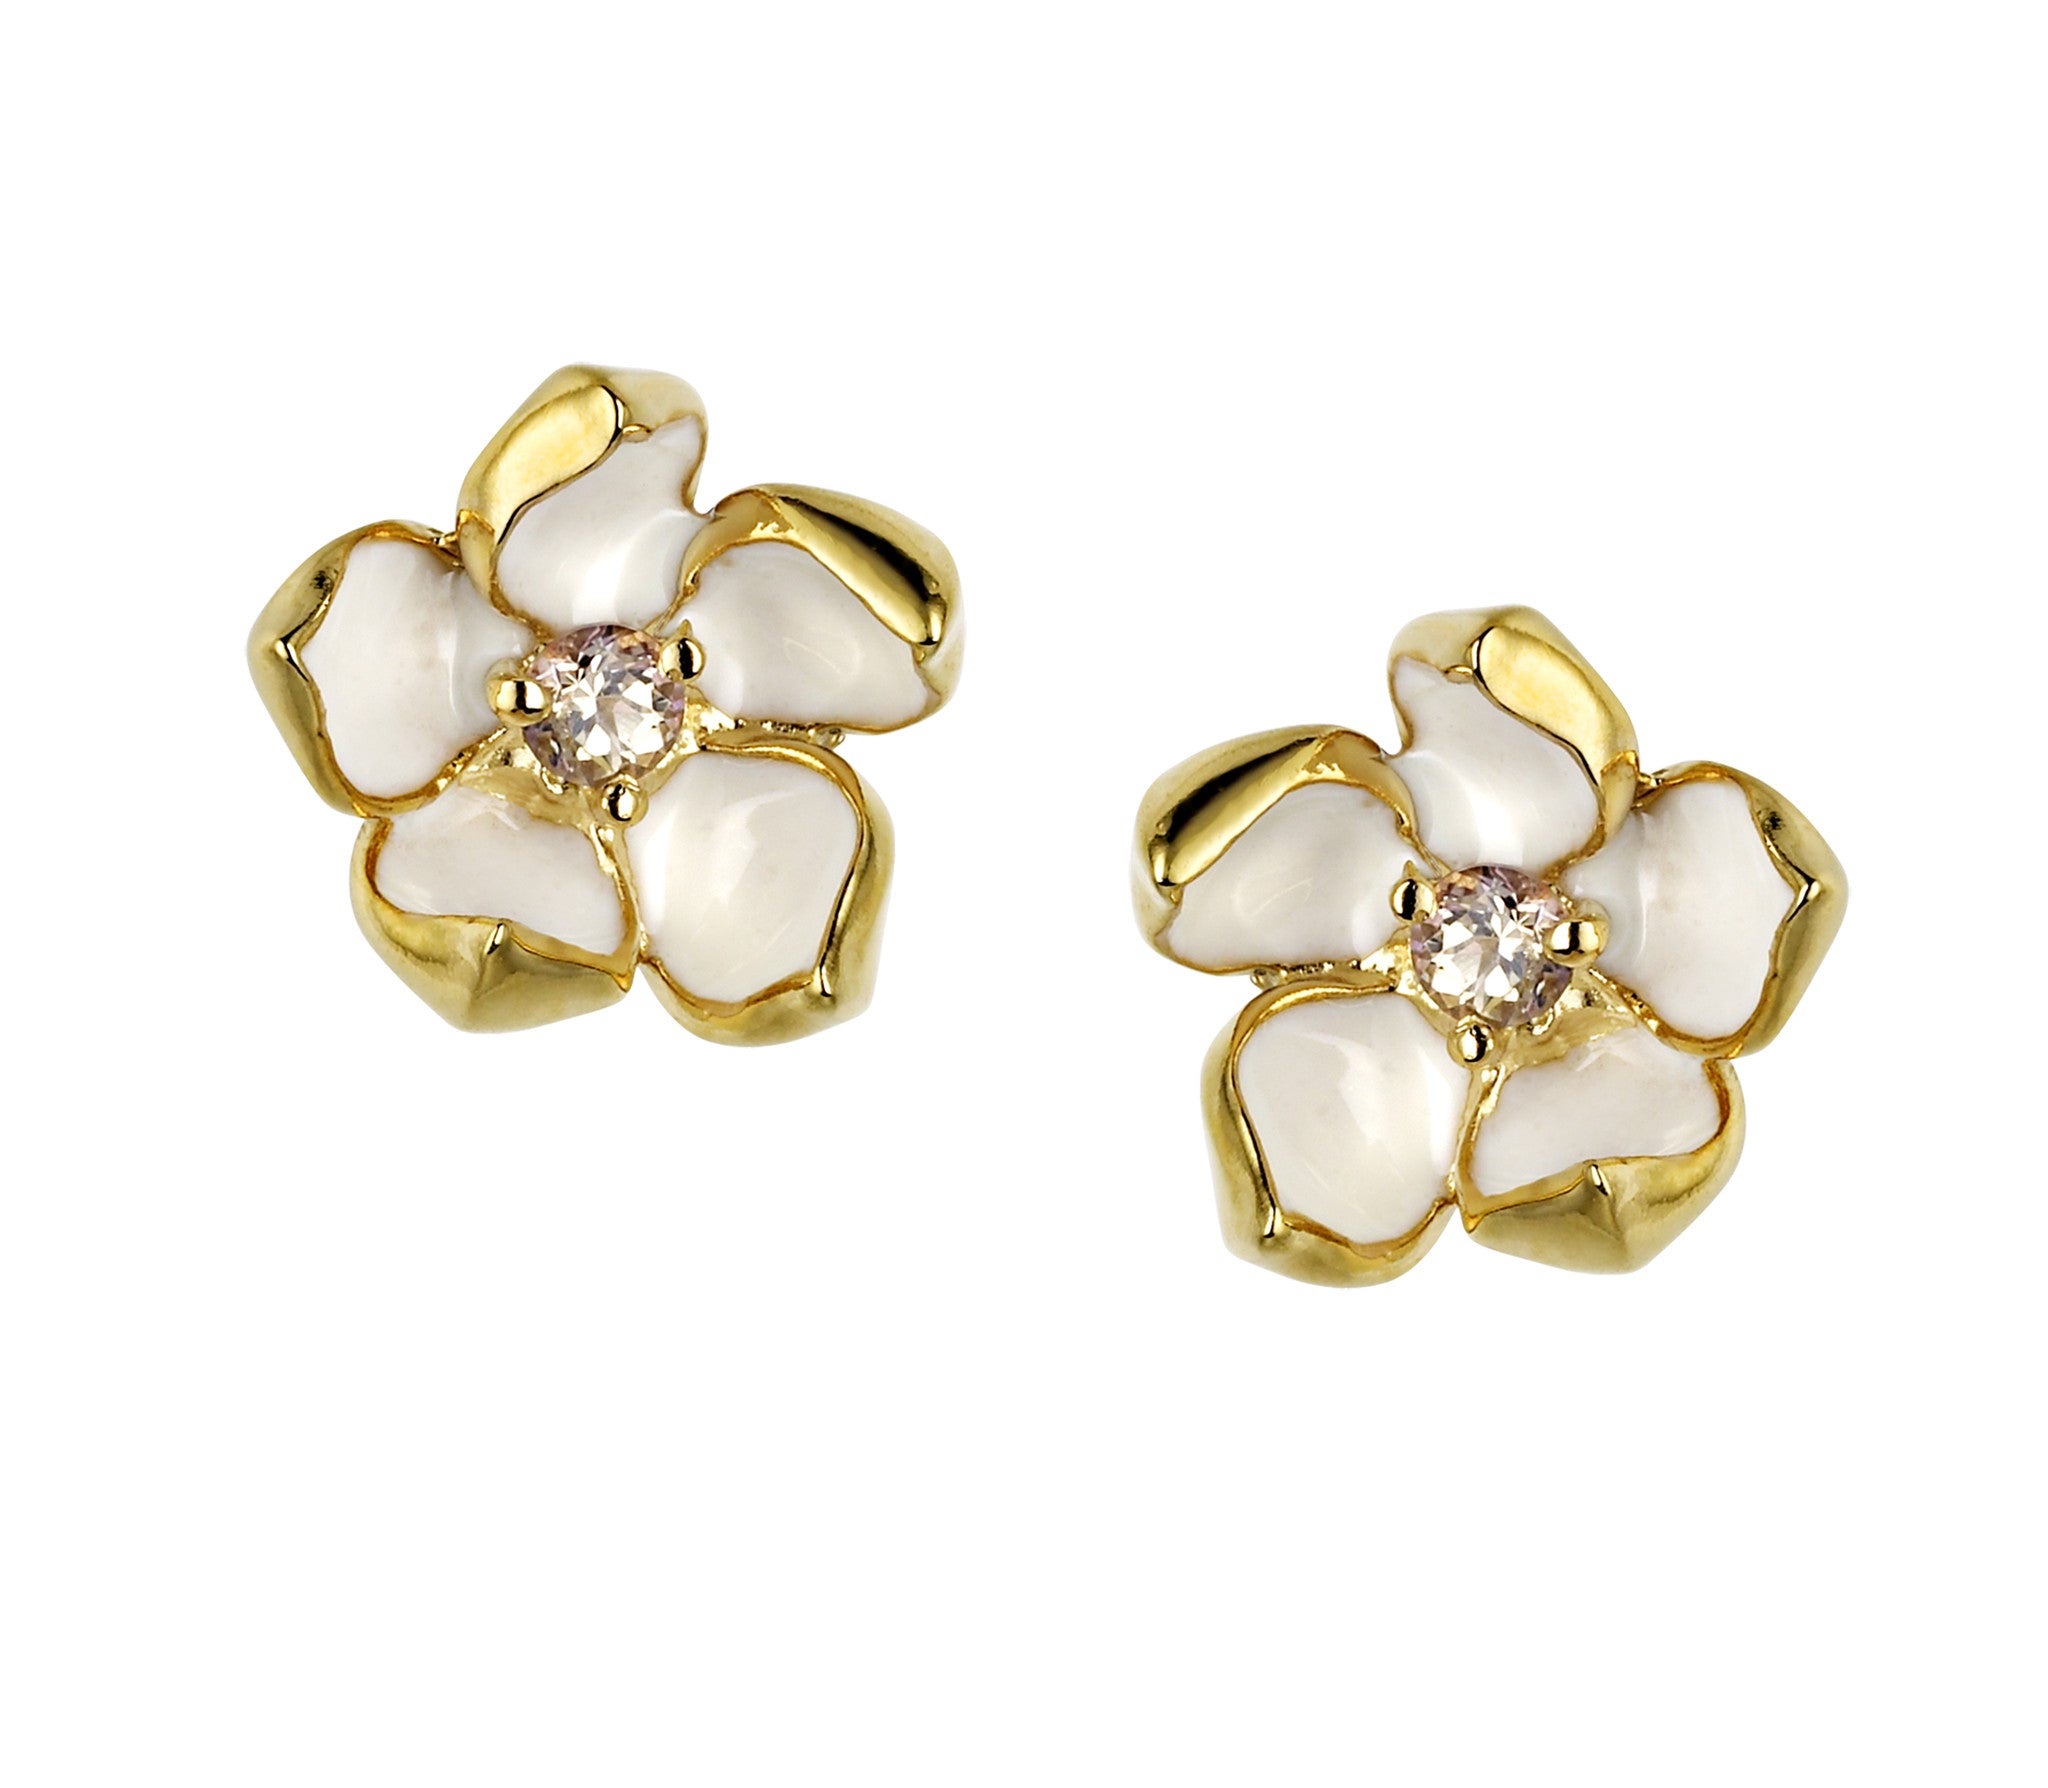 Shaun Leane Earrings Gold Vermeil and Topaz Small Blossom Studs Silver ...